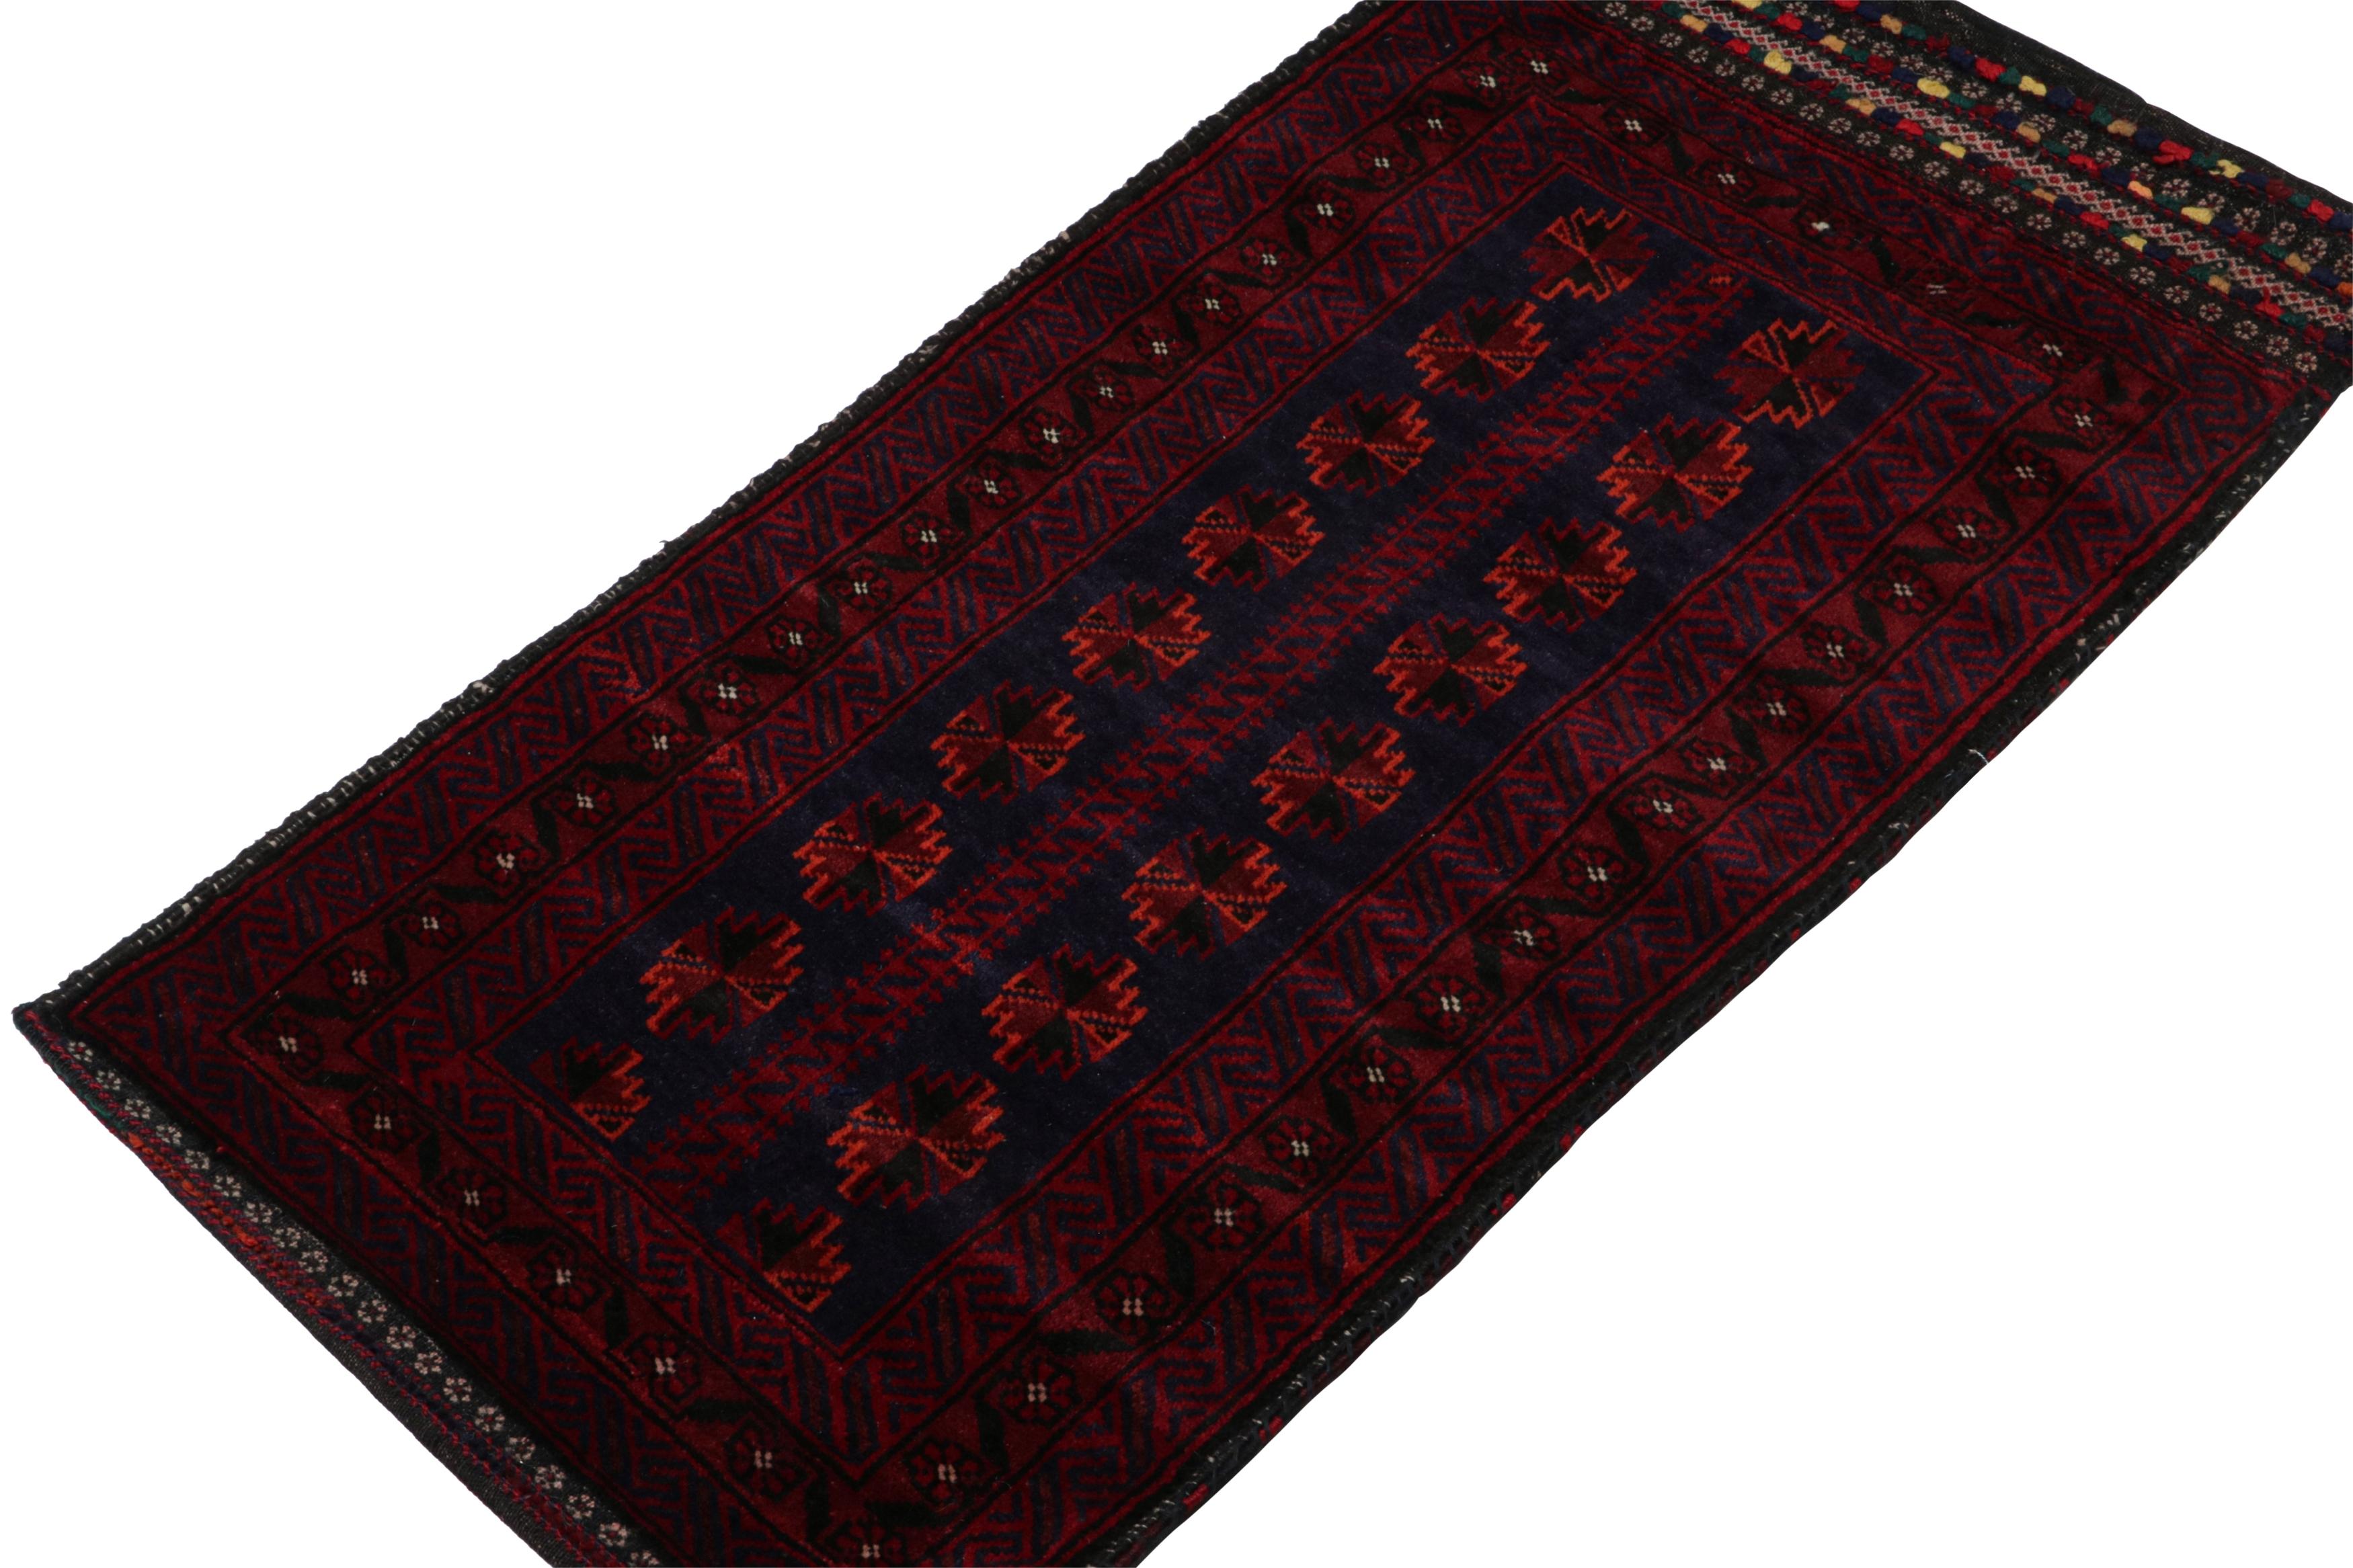 Hand-knotted in wool, this 2x4 Baluch Persian rug of the 1950s is the latest to enter Rug & Kilim’s Antique & Vintage collection.

On the Design:

The vintage rug carries tribal patterns in rich tones of red, blue & black with orange juxtapositions.